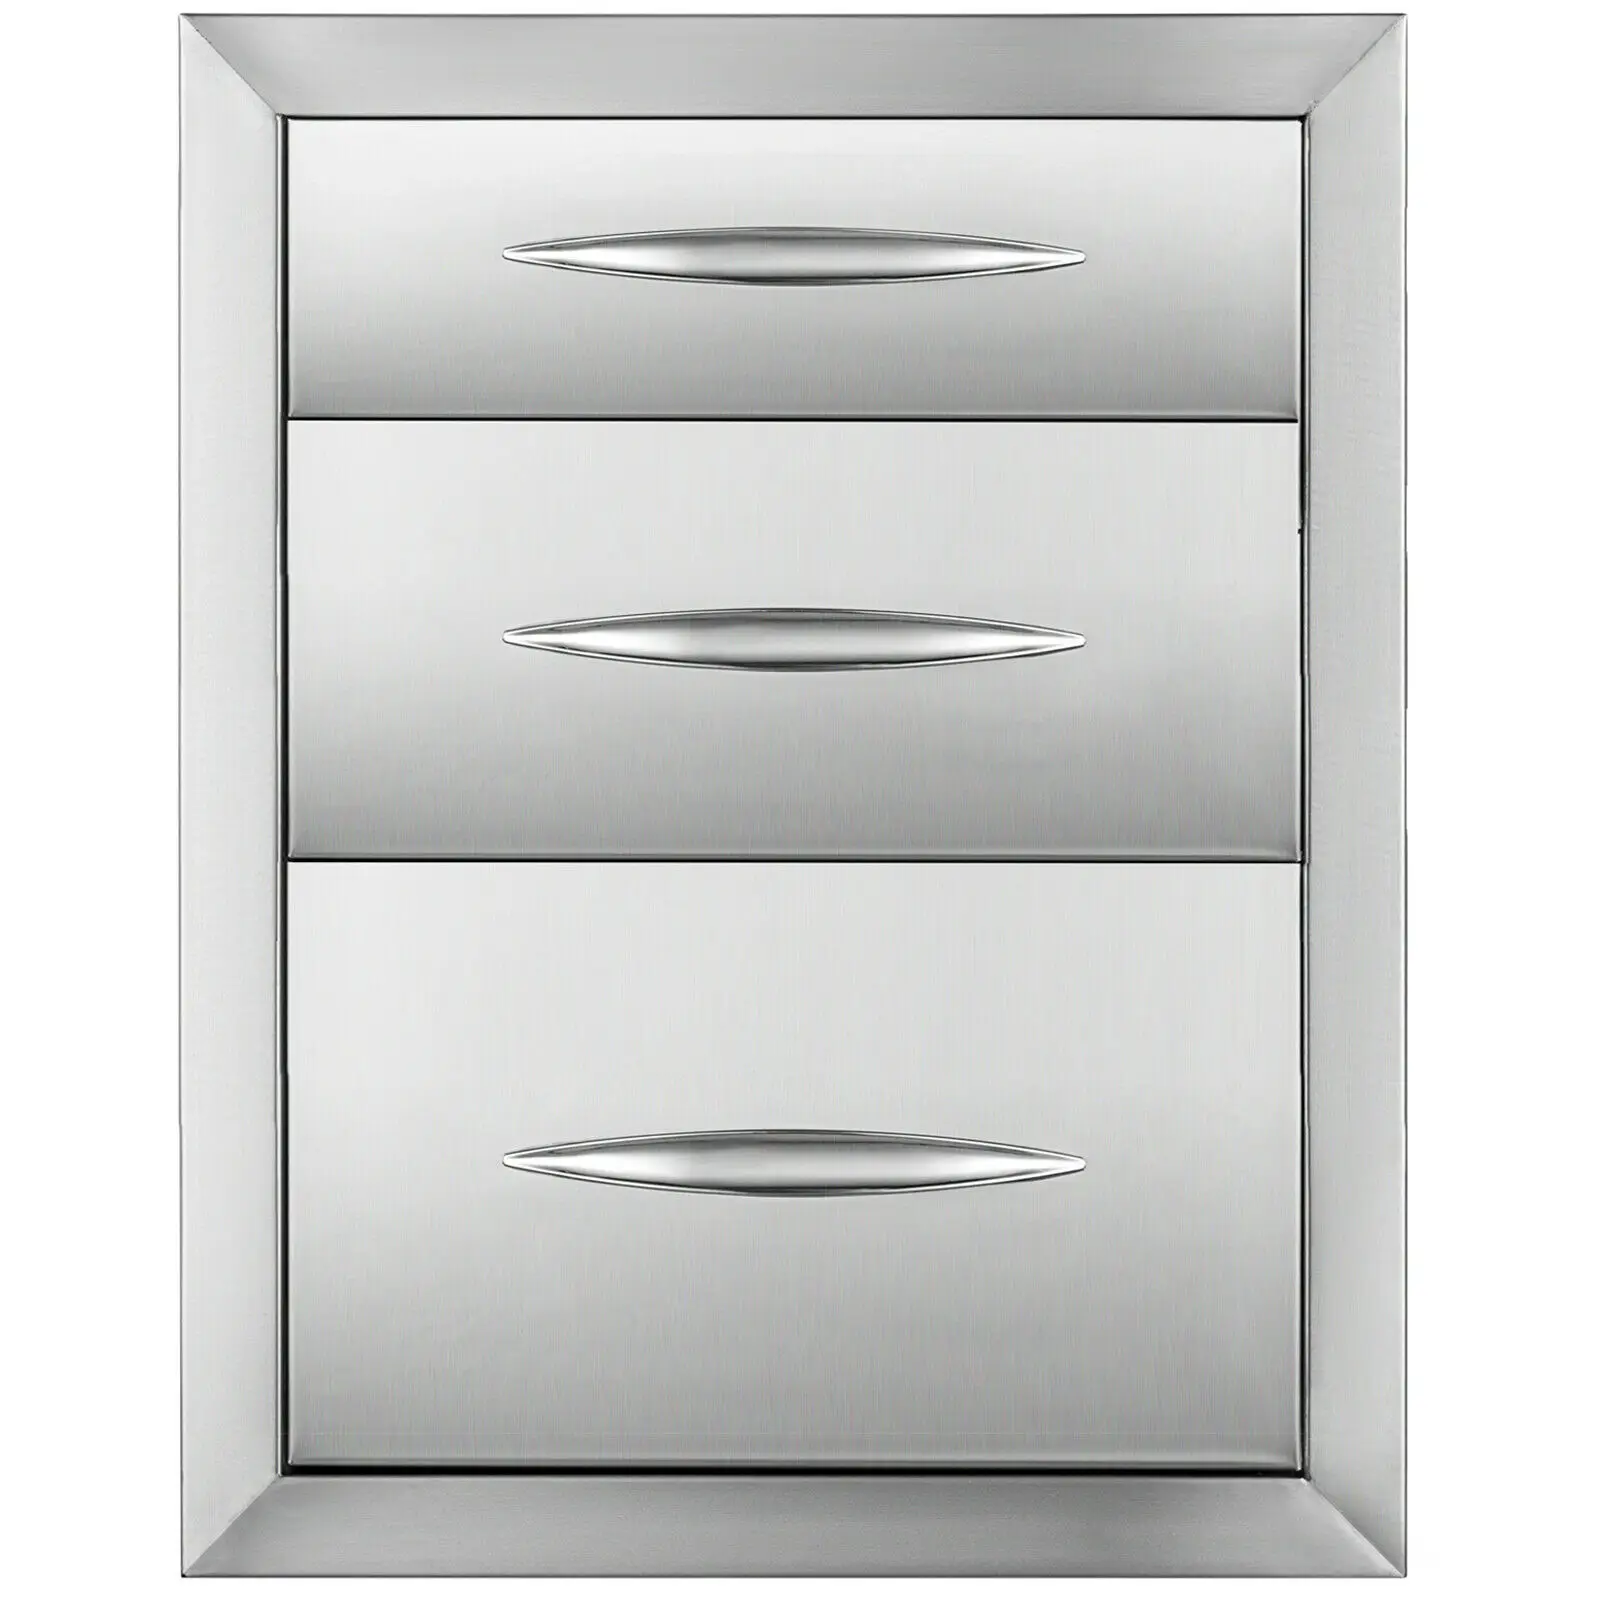 Details about  / Outdoor Stainless Steel Triple Access Chrome Handle Kitchen Drawer 14x20.25 Inch